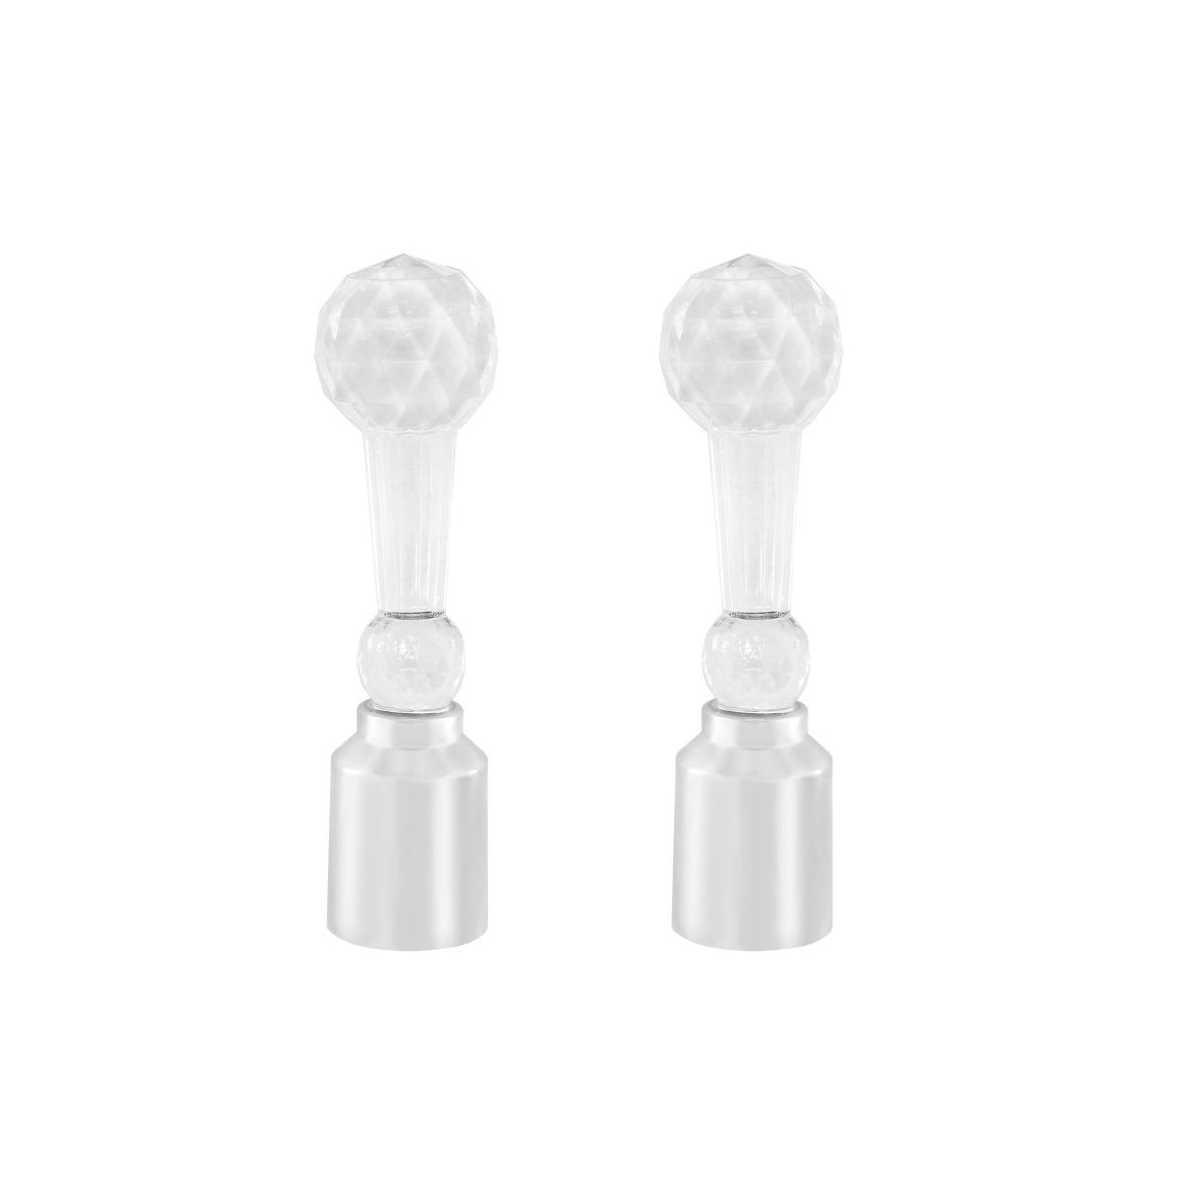 Crystal Ball Tower Bumper Guide Top - Clear (2 Pack)